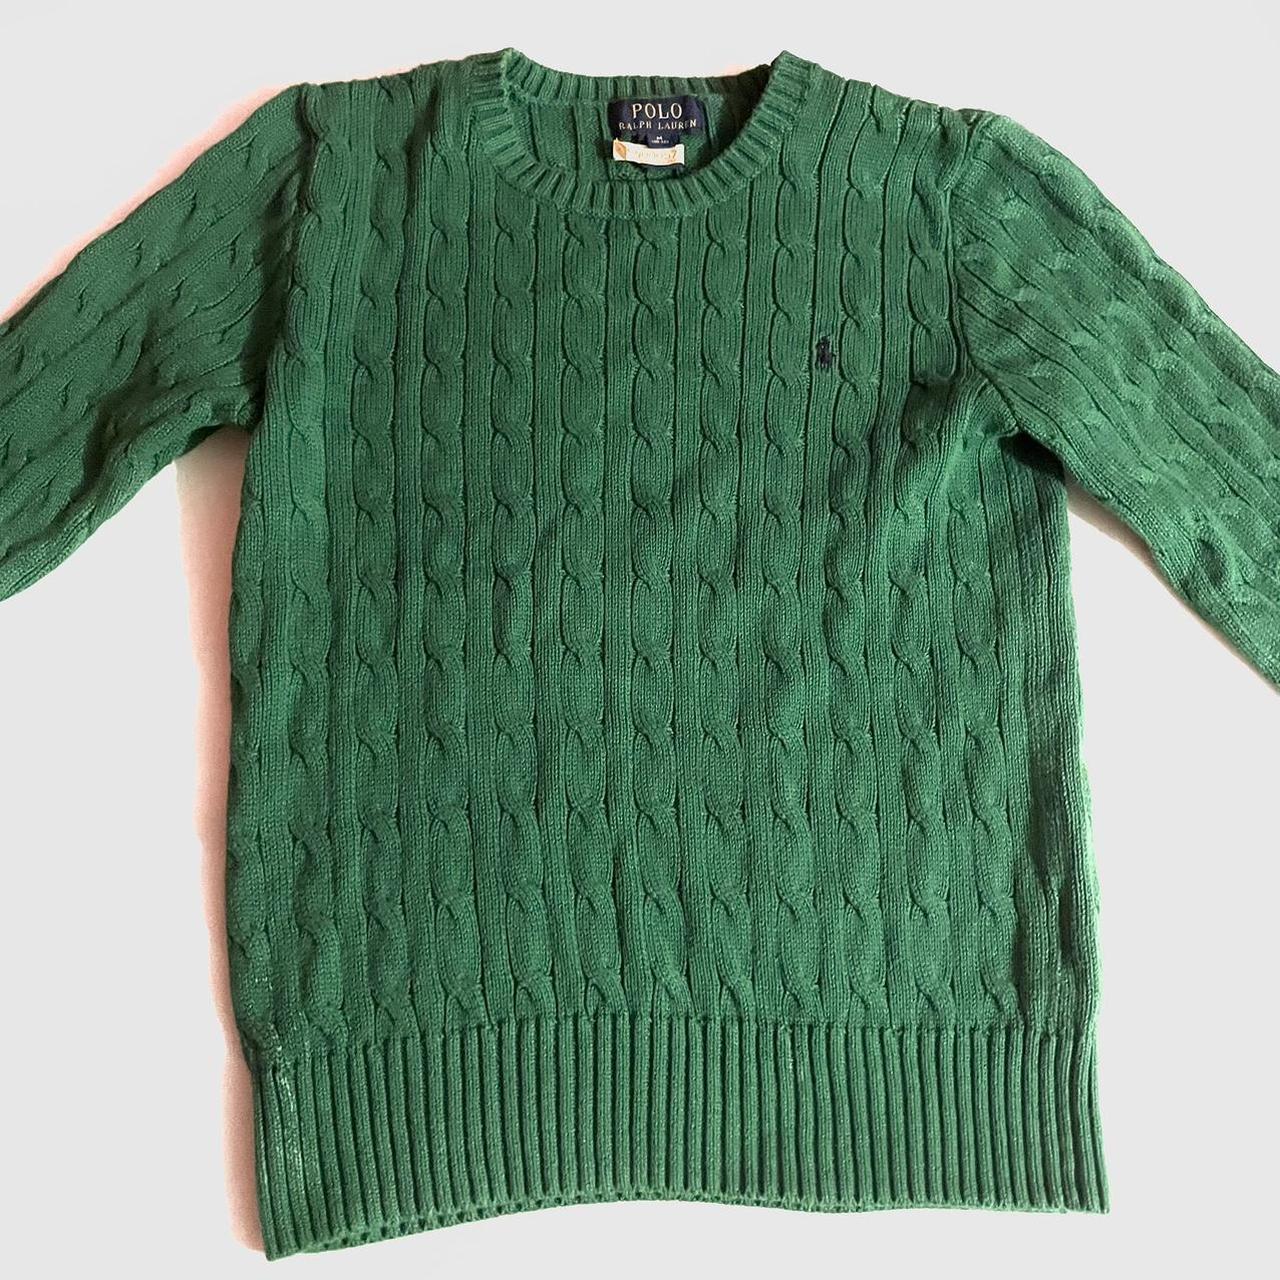 cute Green knitted polo sweater 💚💚 Great brand ... - Depop